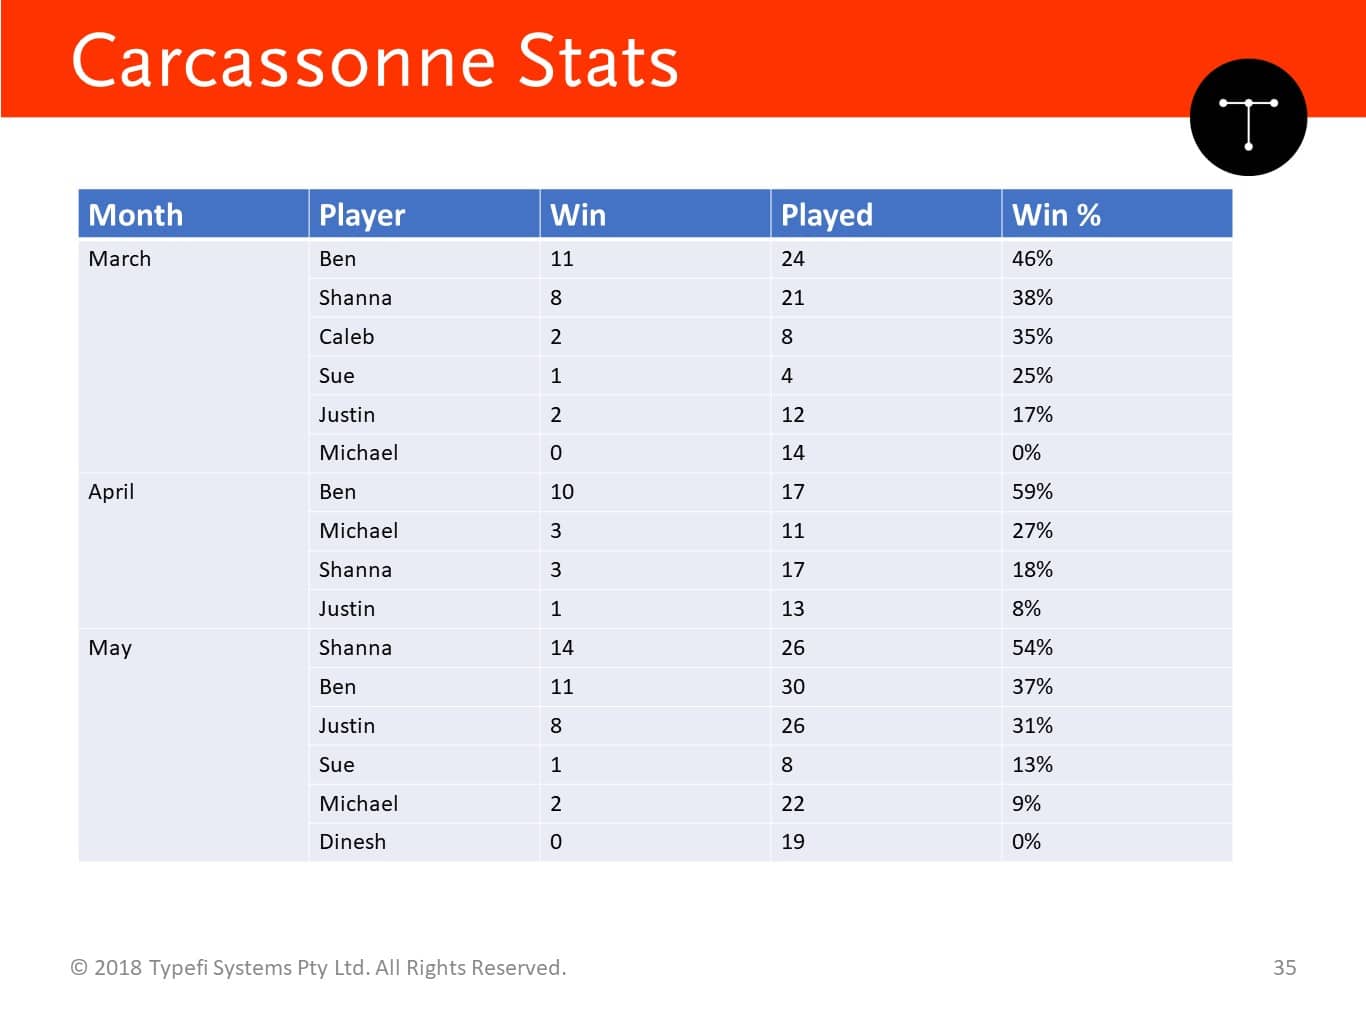 A simple five-column Carcassone statistics table. Columns are labelled Month, Player, Win, Played, Win percentage.